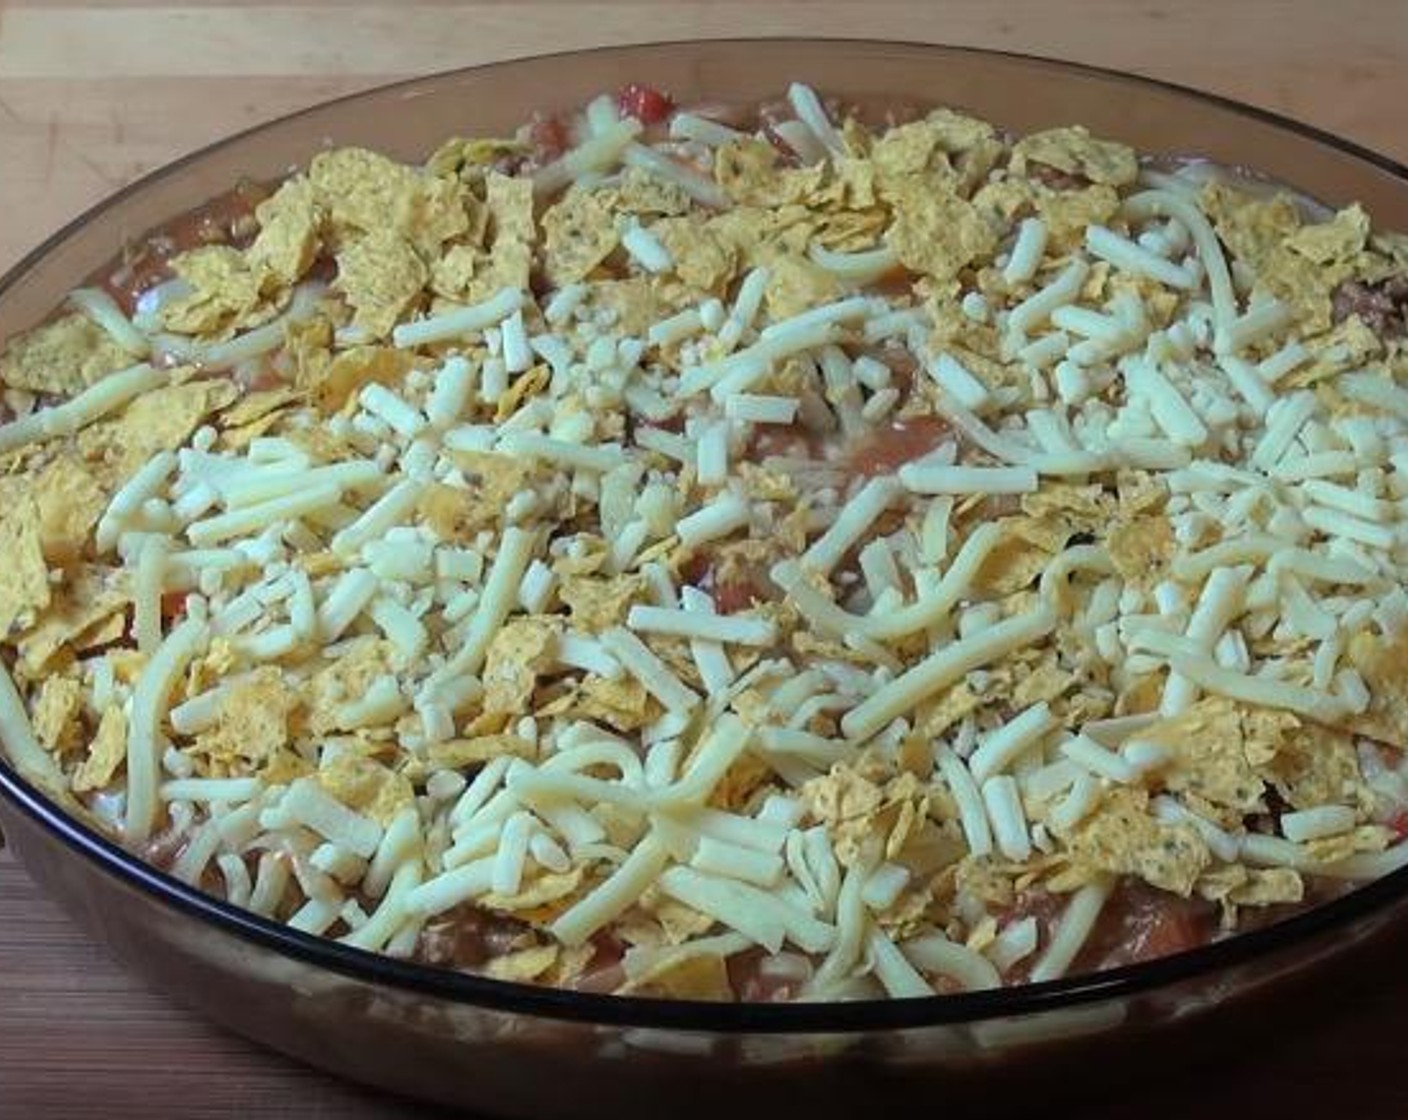 step 4 In a lightly greased oven-proof casserole dish, cover the bottom with Corn Chips (8 1/3 cups), followed by half of the beef mixture and half of the Cheese (2 cups). Repeat the layers once more.